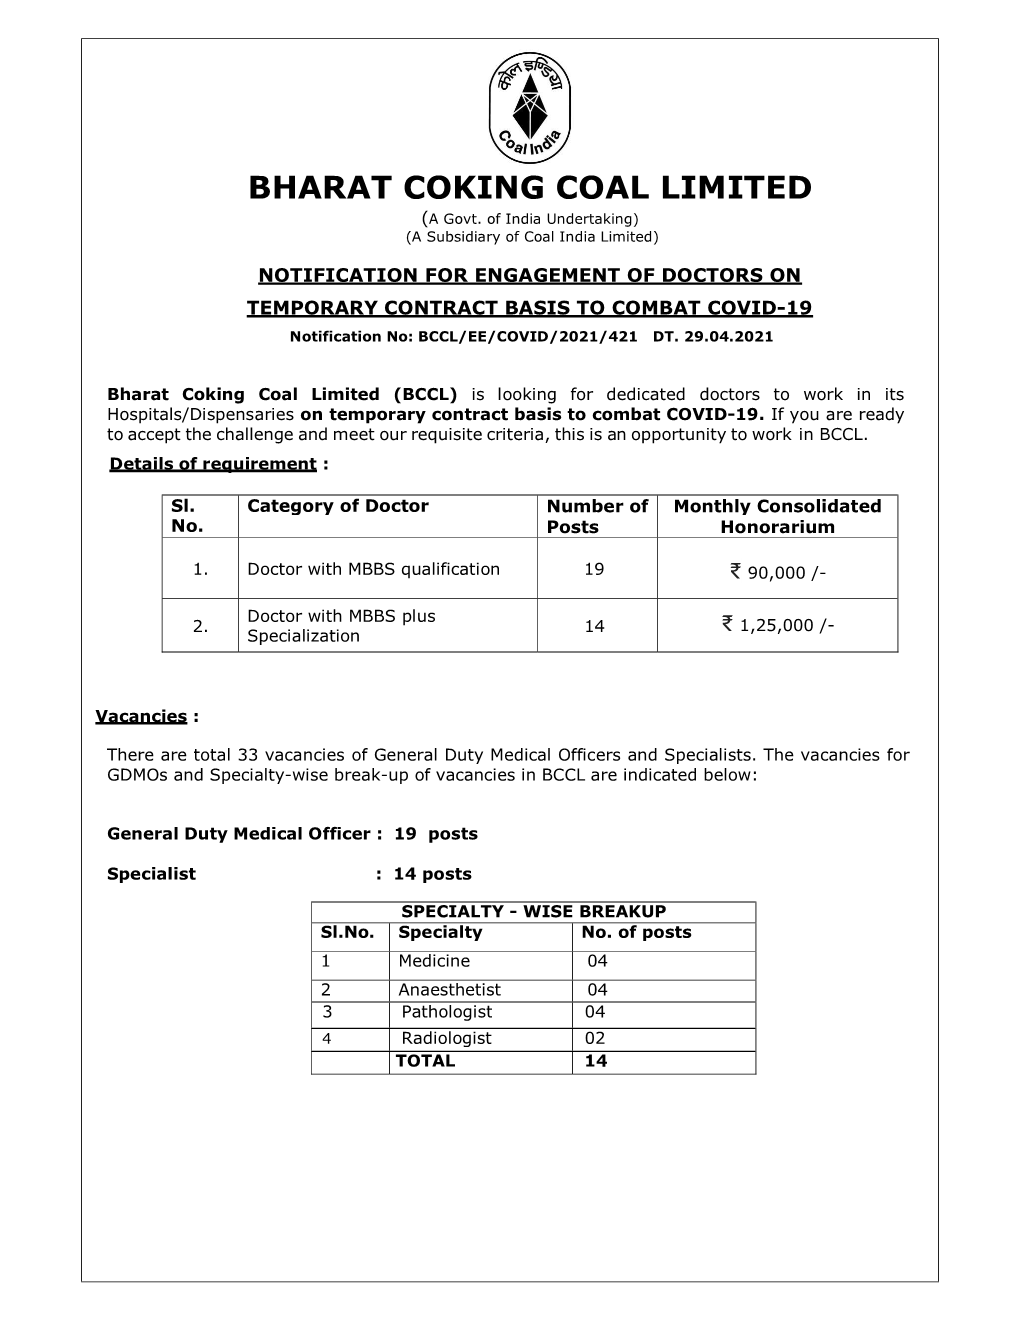 BHARAT COKING COAL LIMITED (A Govt